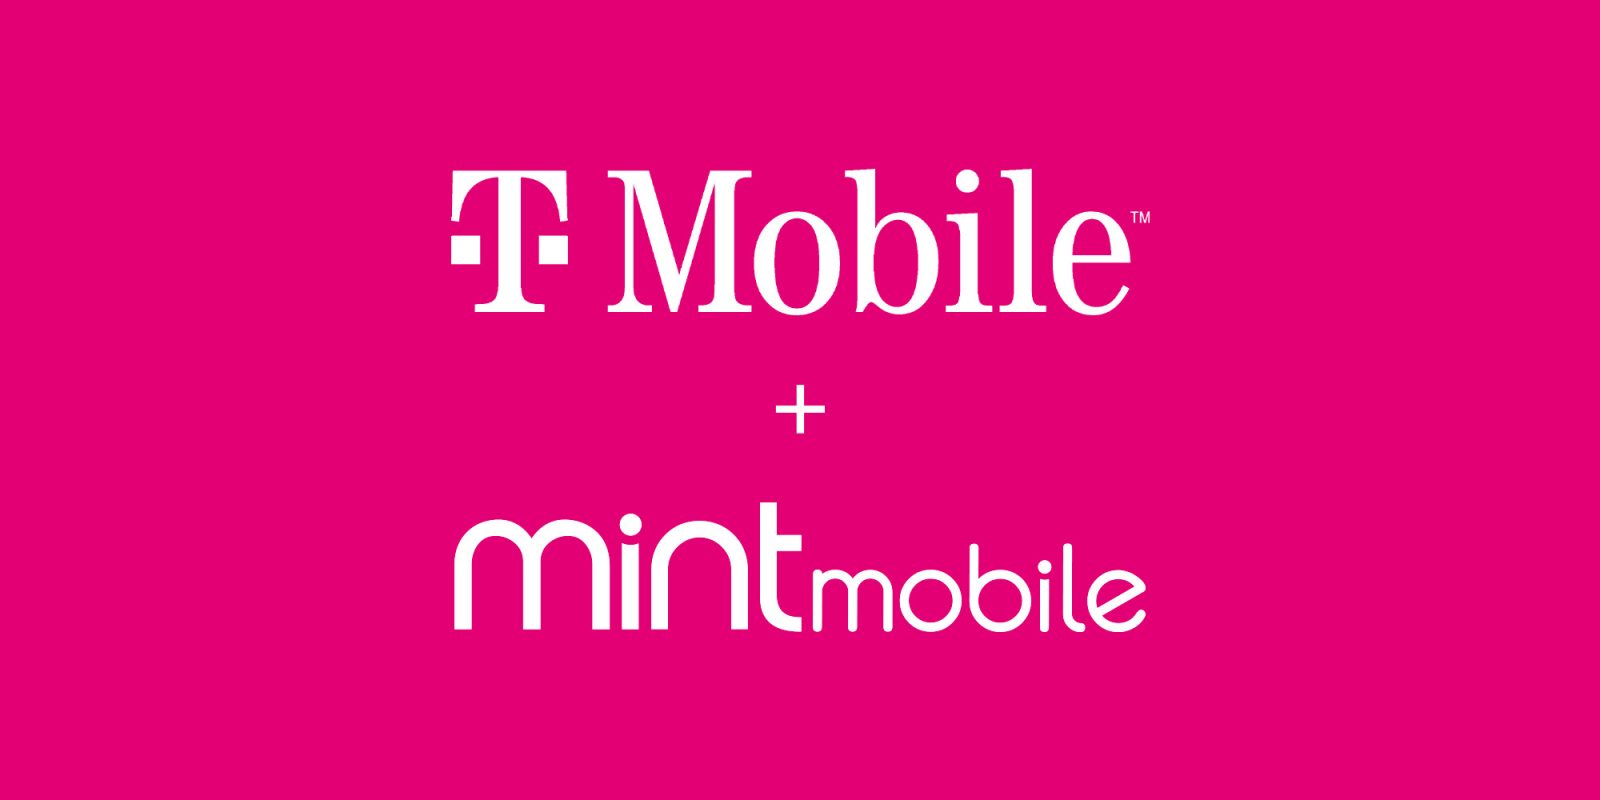 T-Mobile acquiring Mint Mobile, the Ryan Reynolds-backed prepaid wireless brand